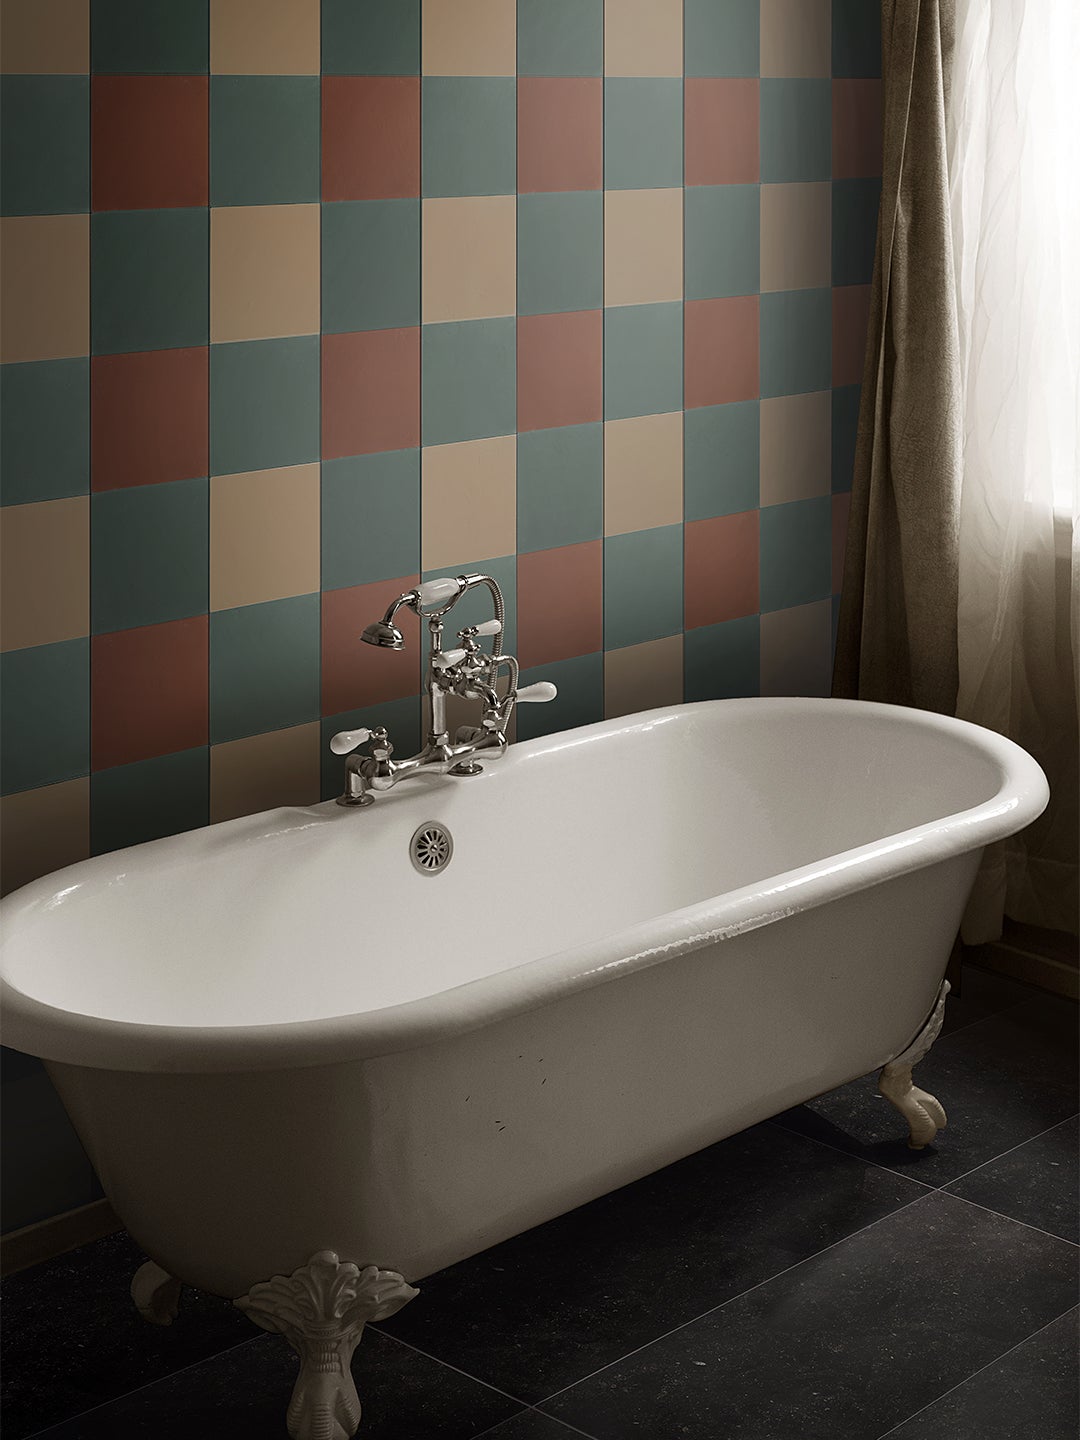 claw foot bathtub in front of tri-color tiled wall.